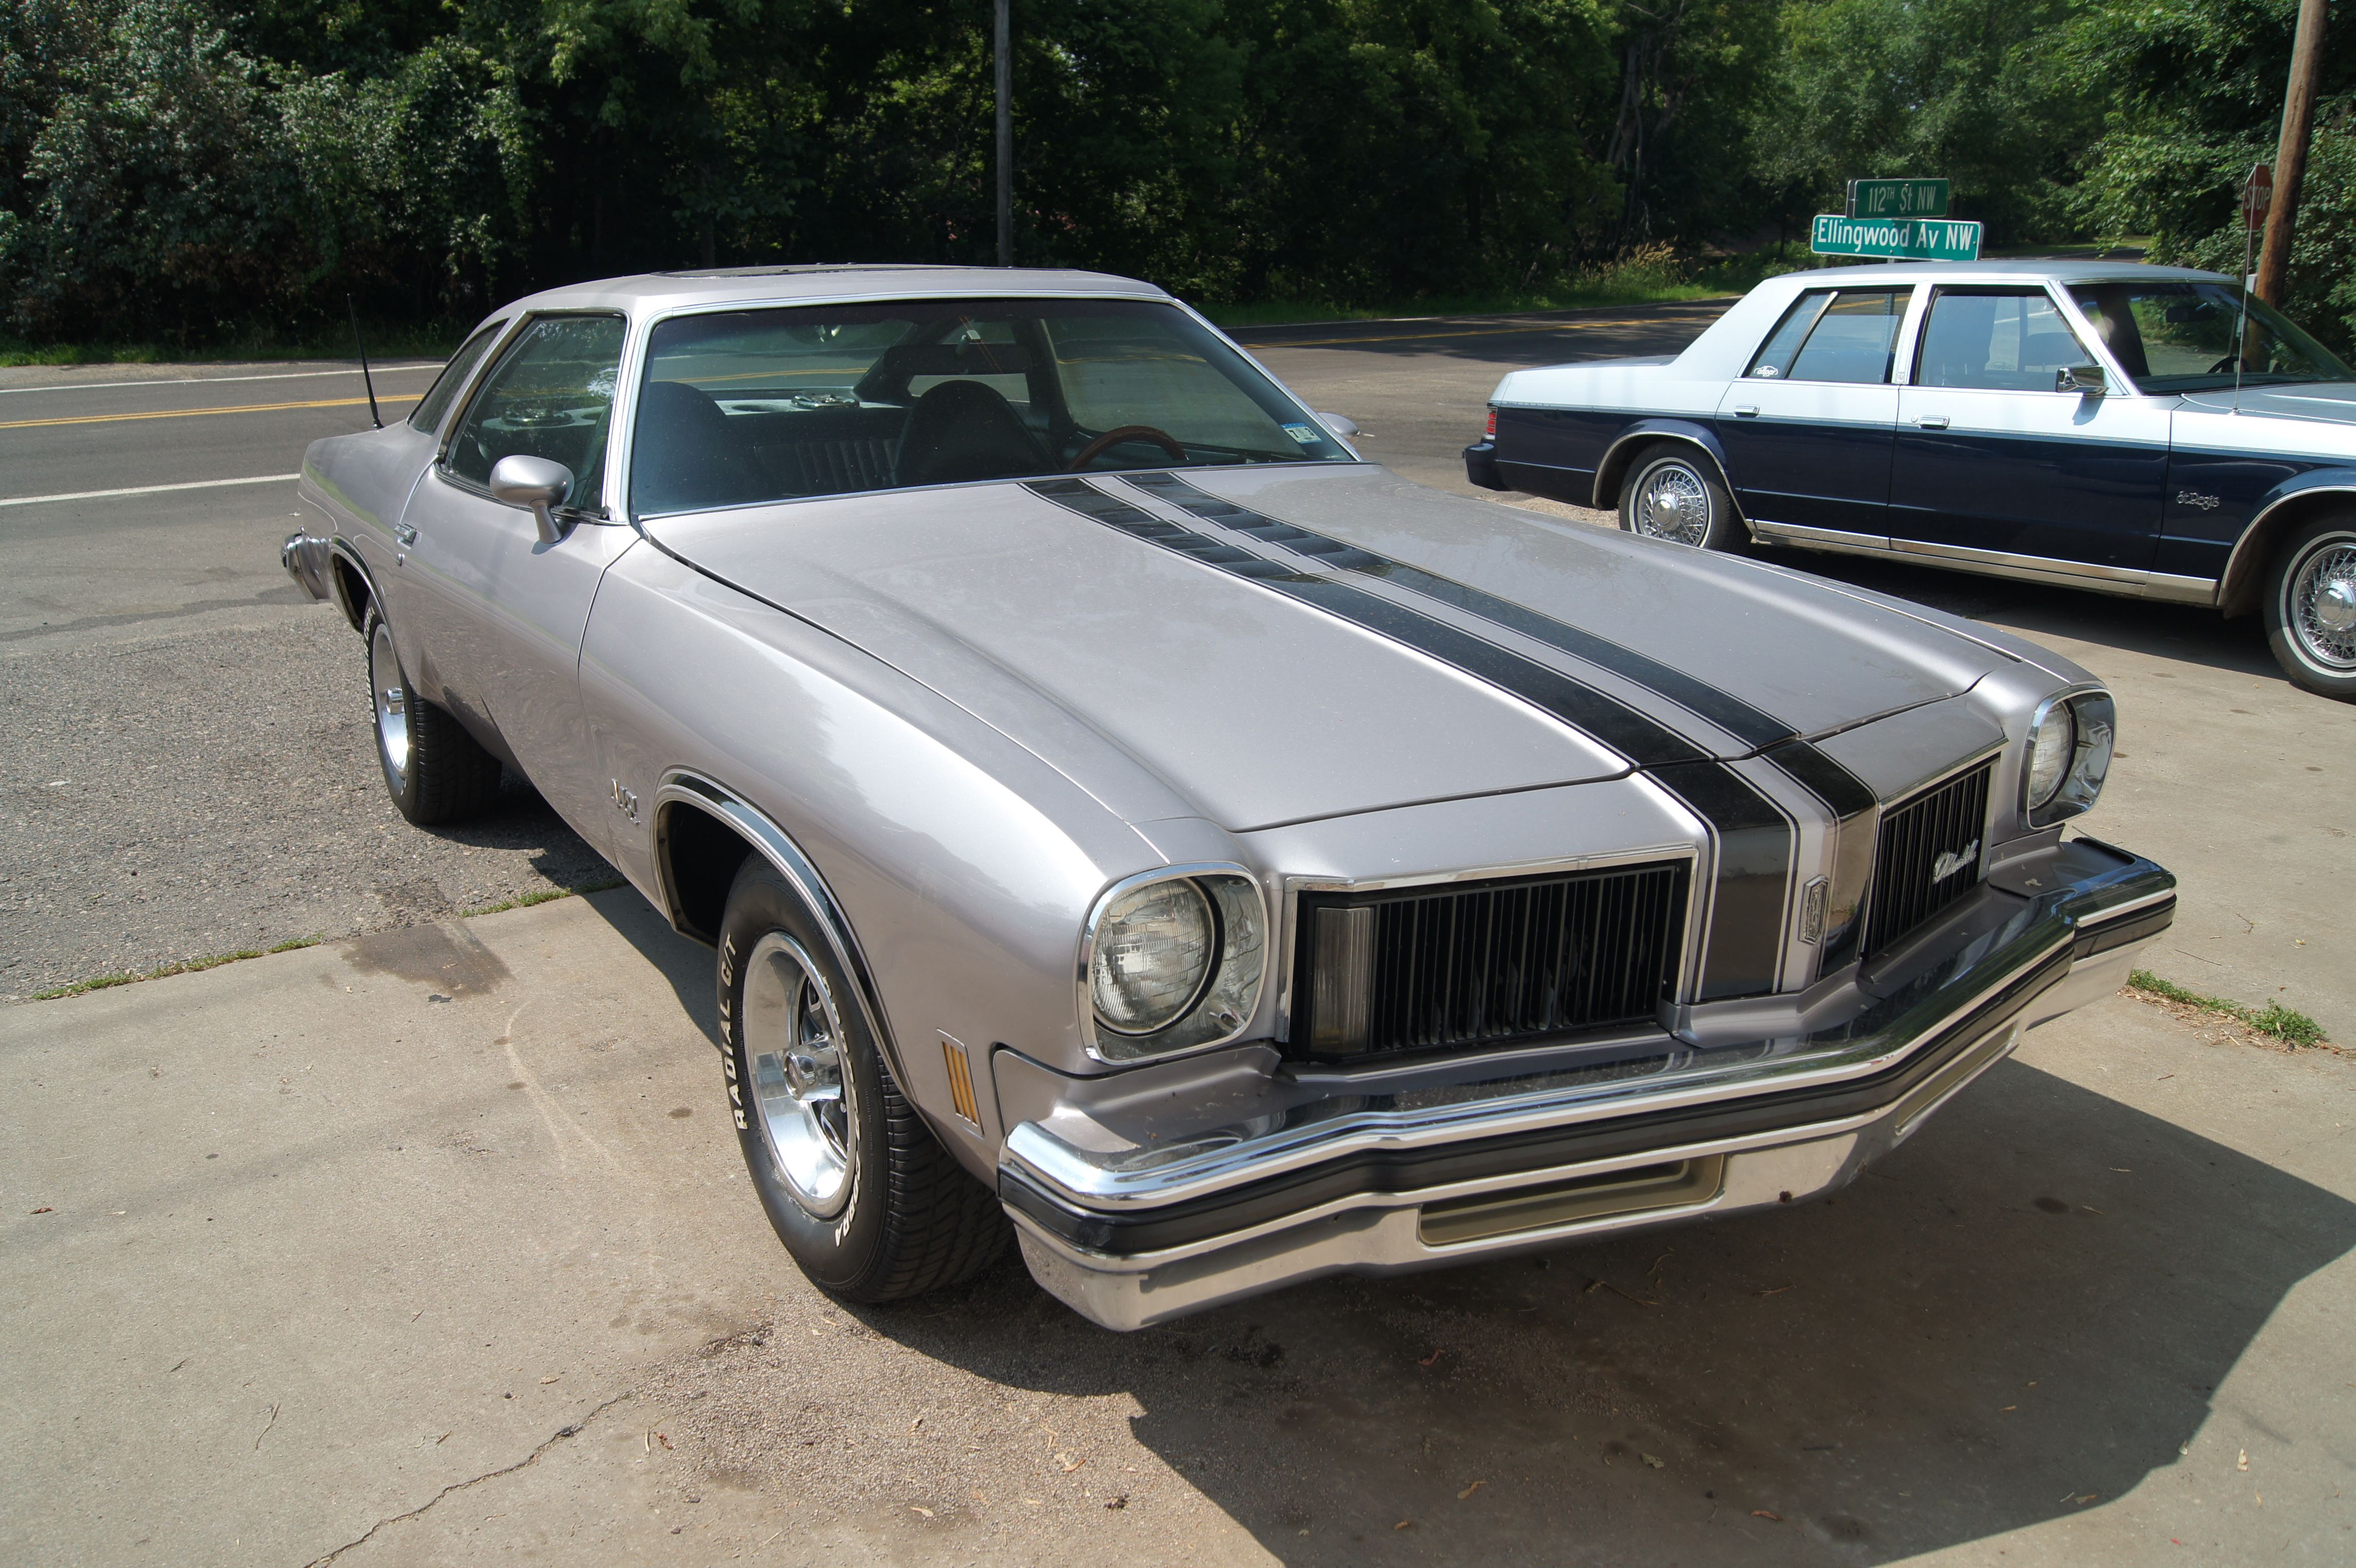 A parked 1975 Oldsmobile 442